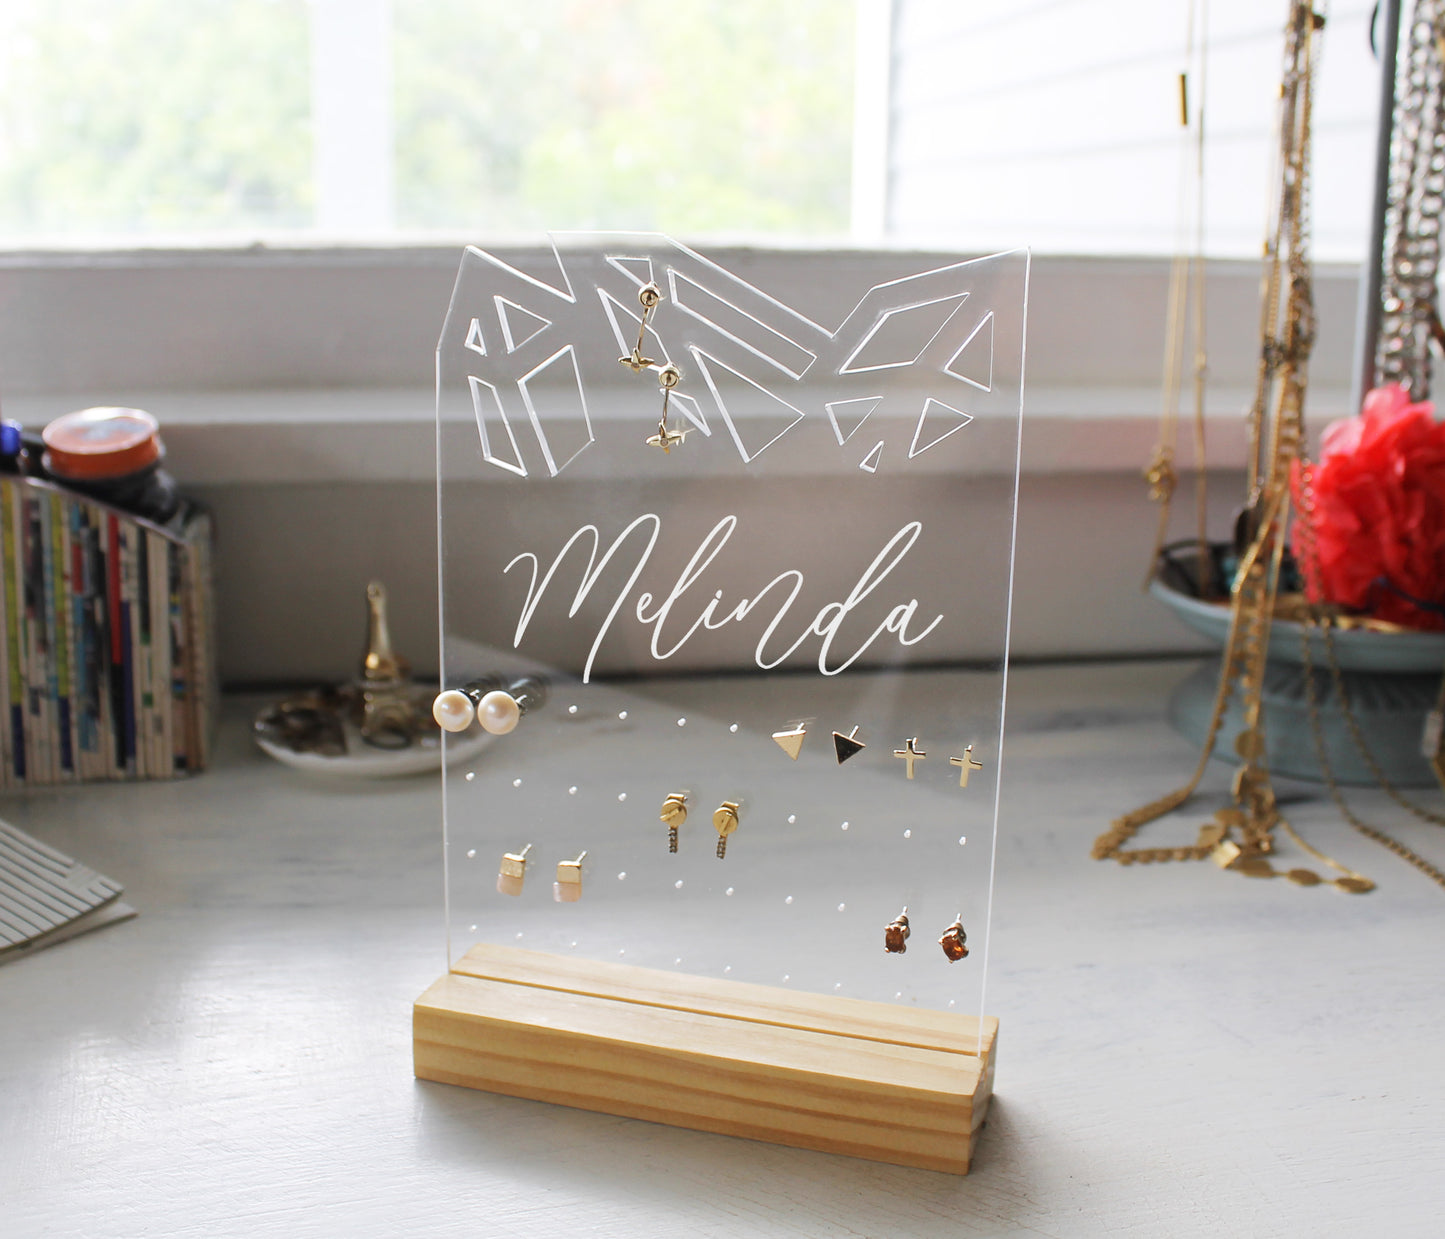 Personalized Jewelry Stands | Melinda